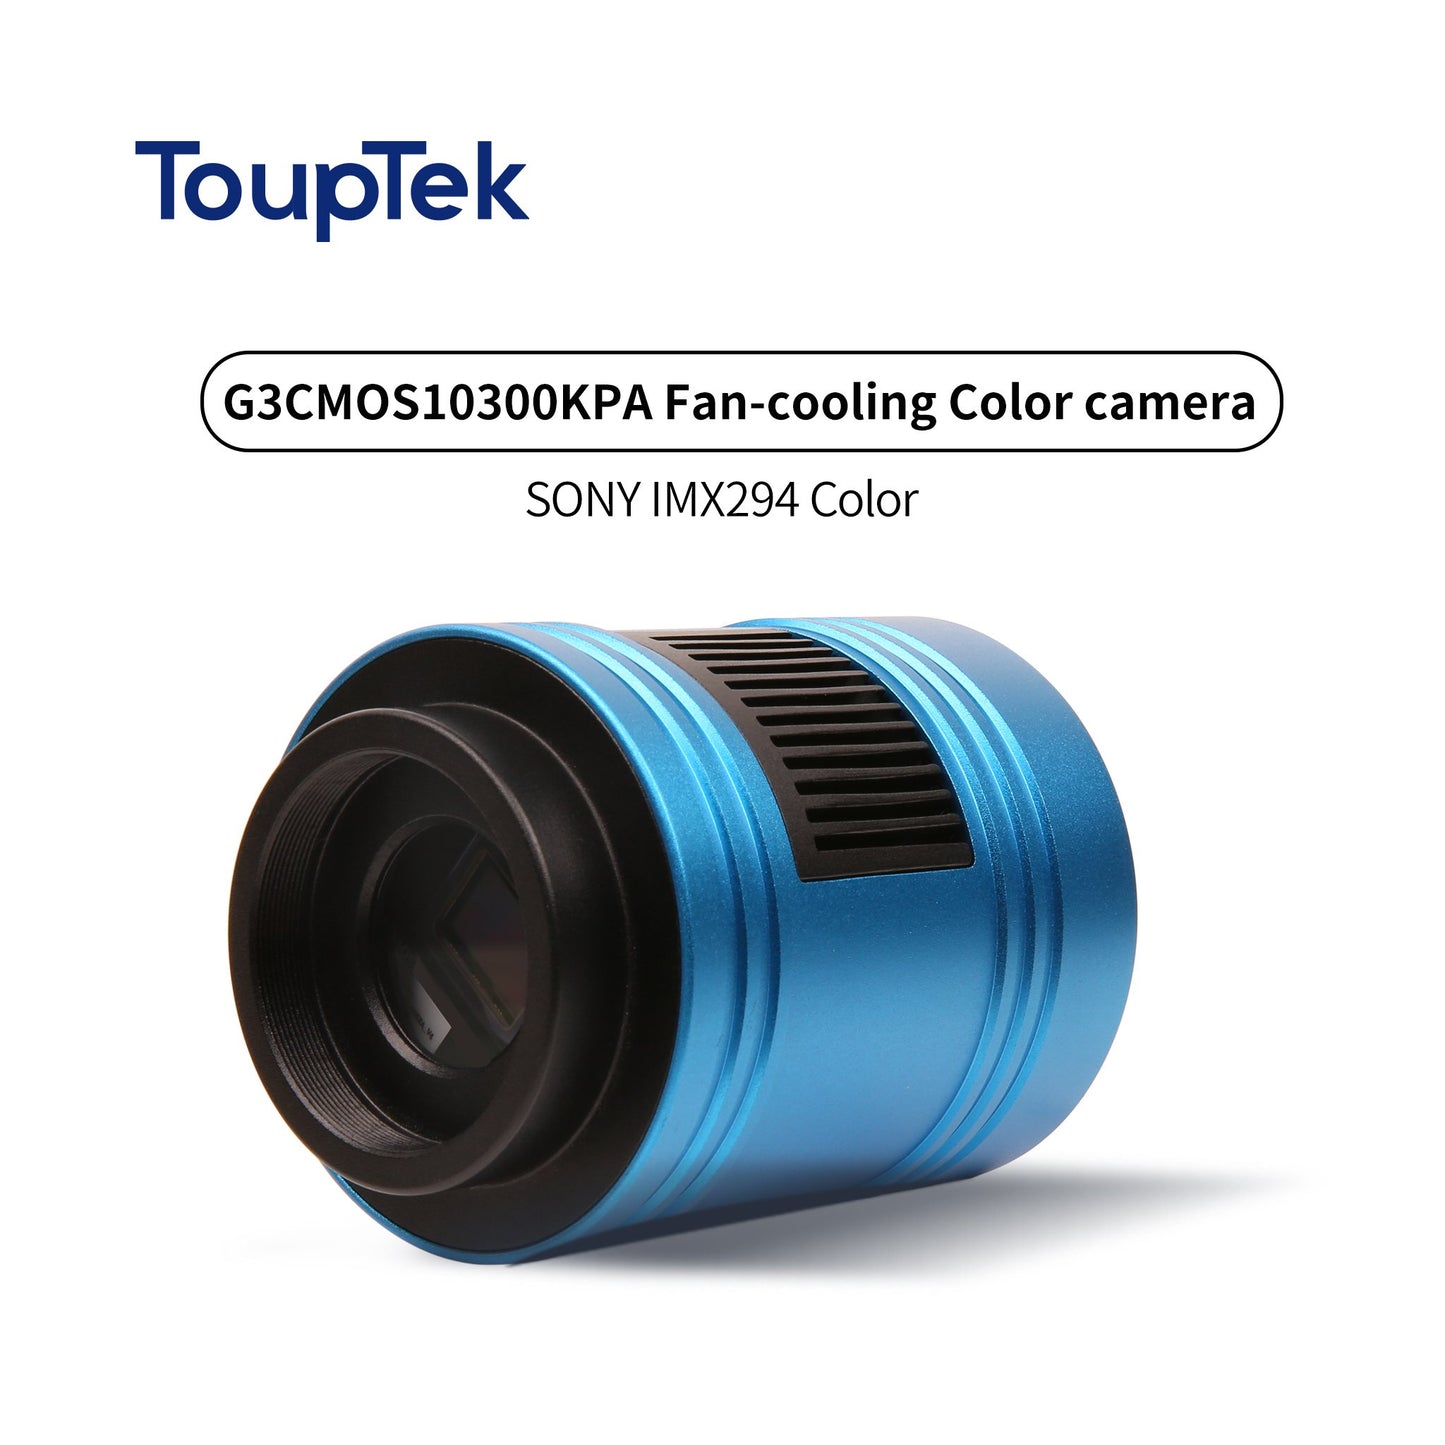 G3CMOS10300KPA IMX294 Fan-cooling Colorful Camera